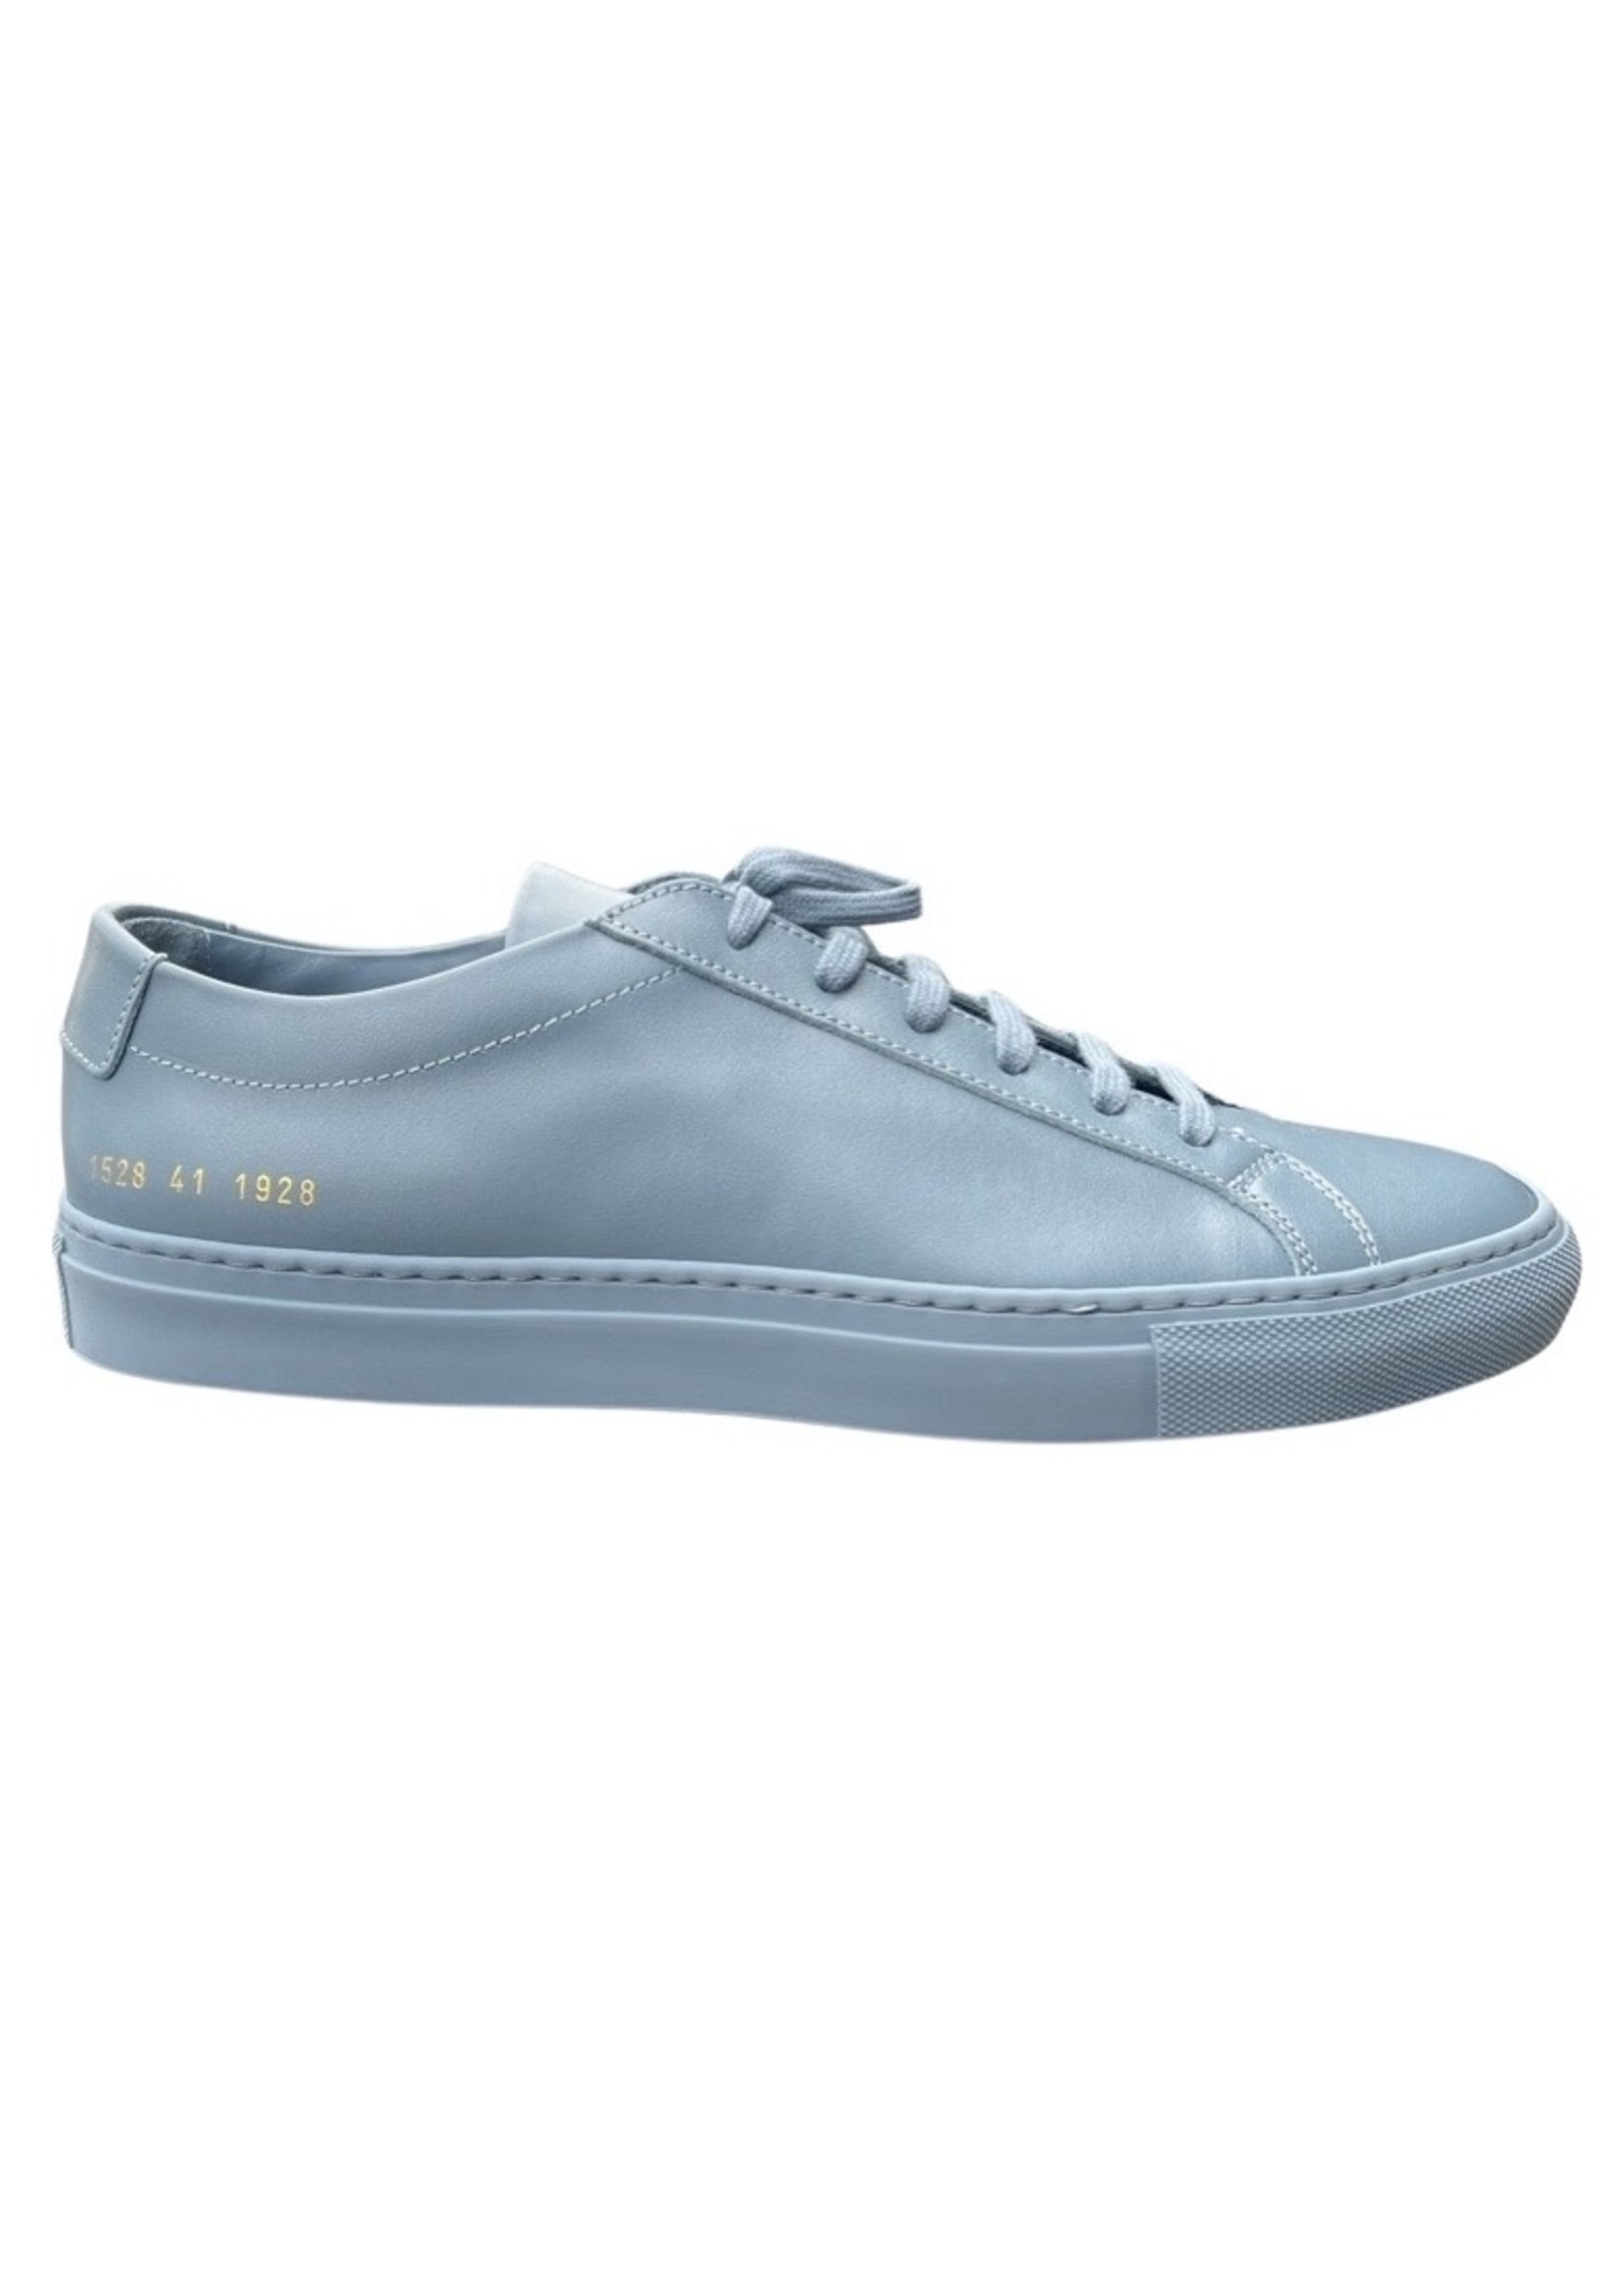 COMMON PROJECTS ACHILLES LOW SNEAKER